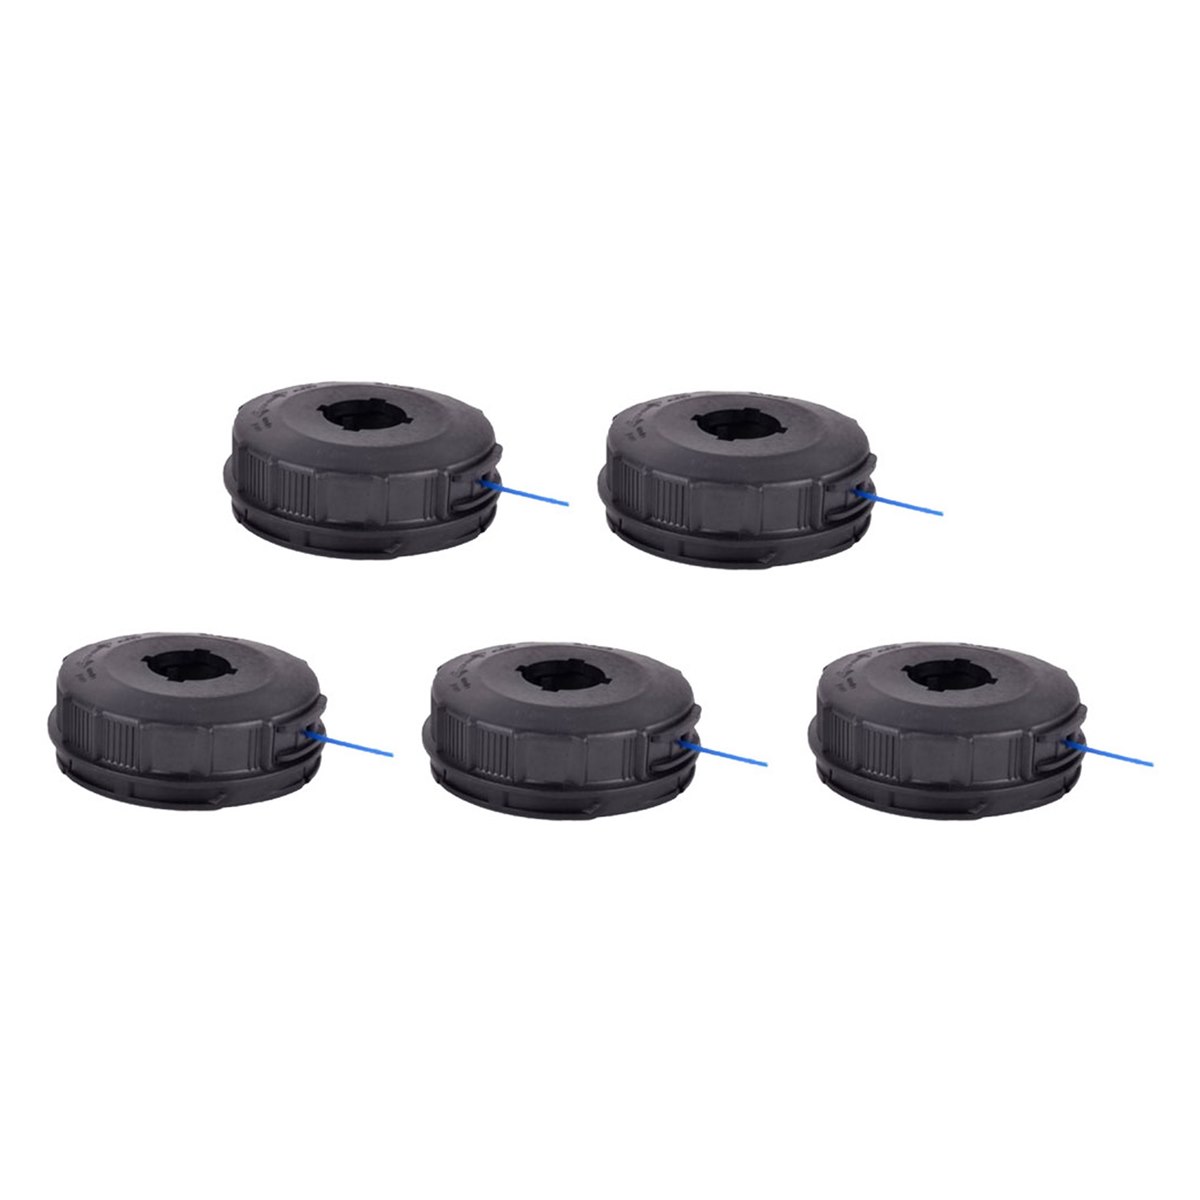 Case of 5 x ALM GA403 Replacement Spool and Line for Gardena models